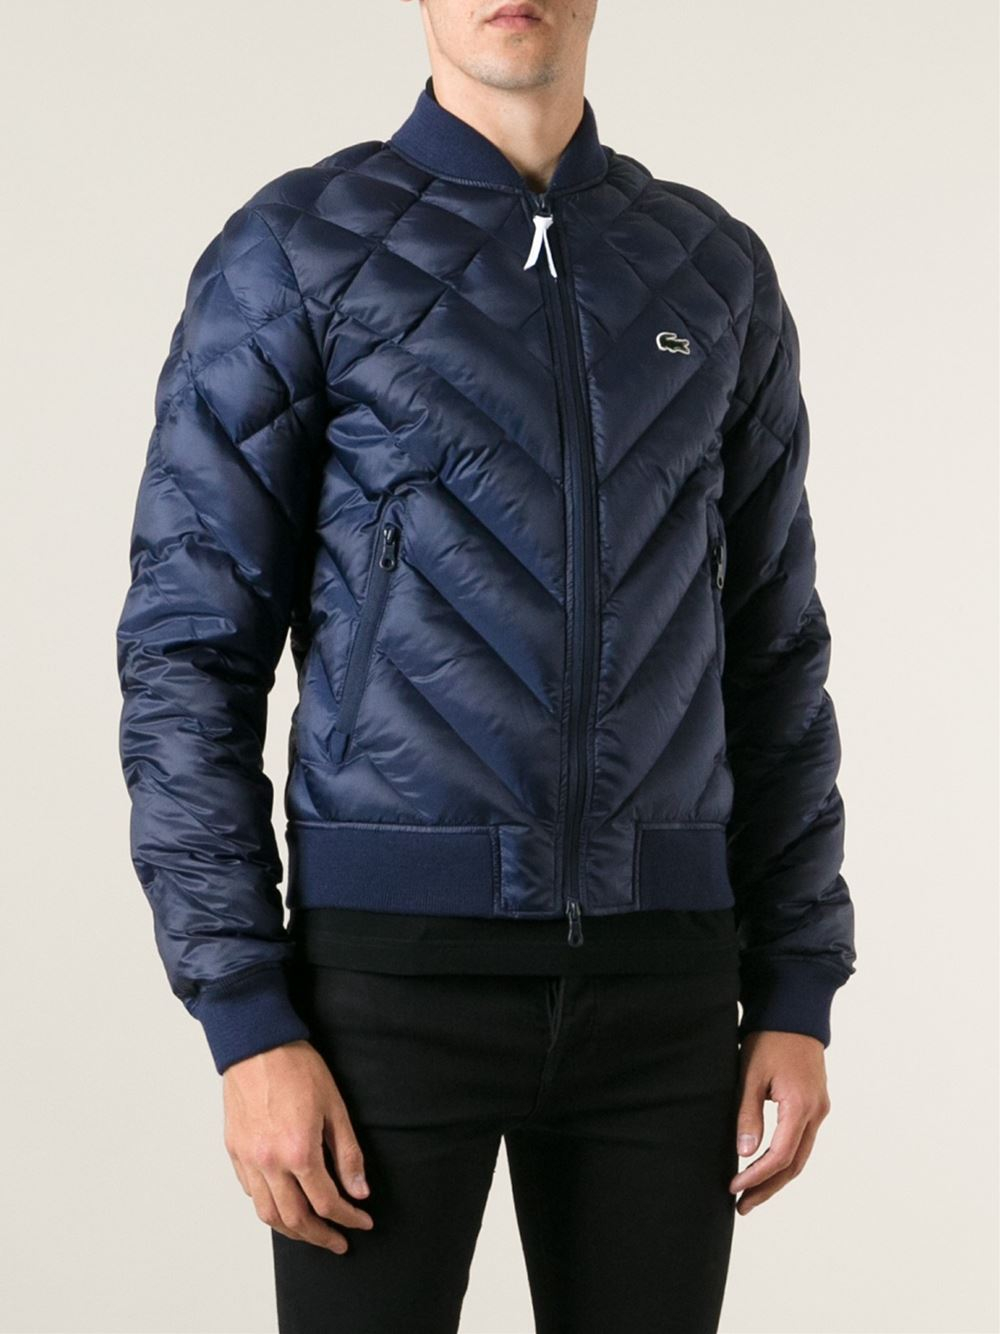 Lacoste L!ive Quilted Jacket in Blue for Men - Lyst